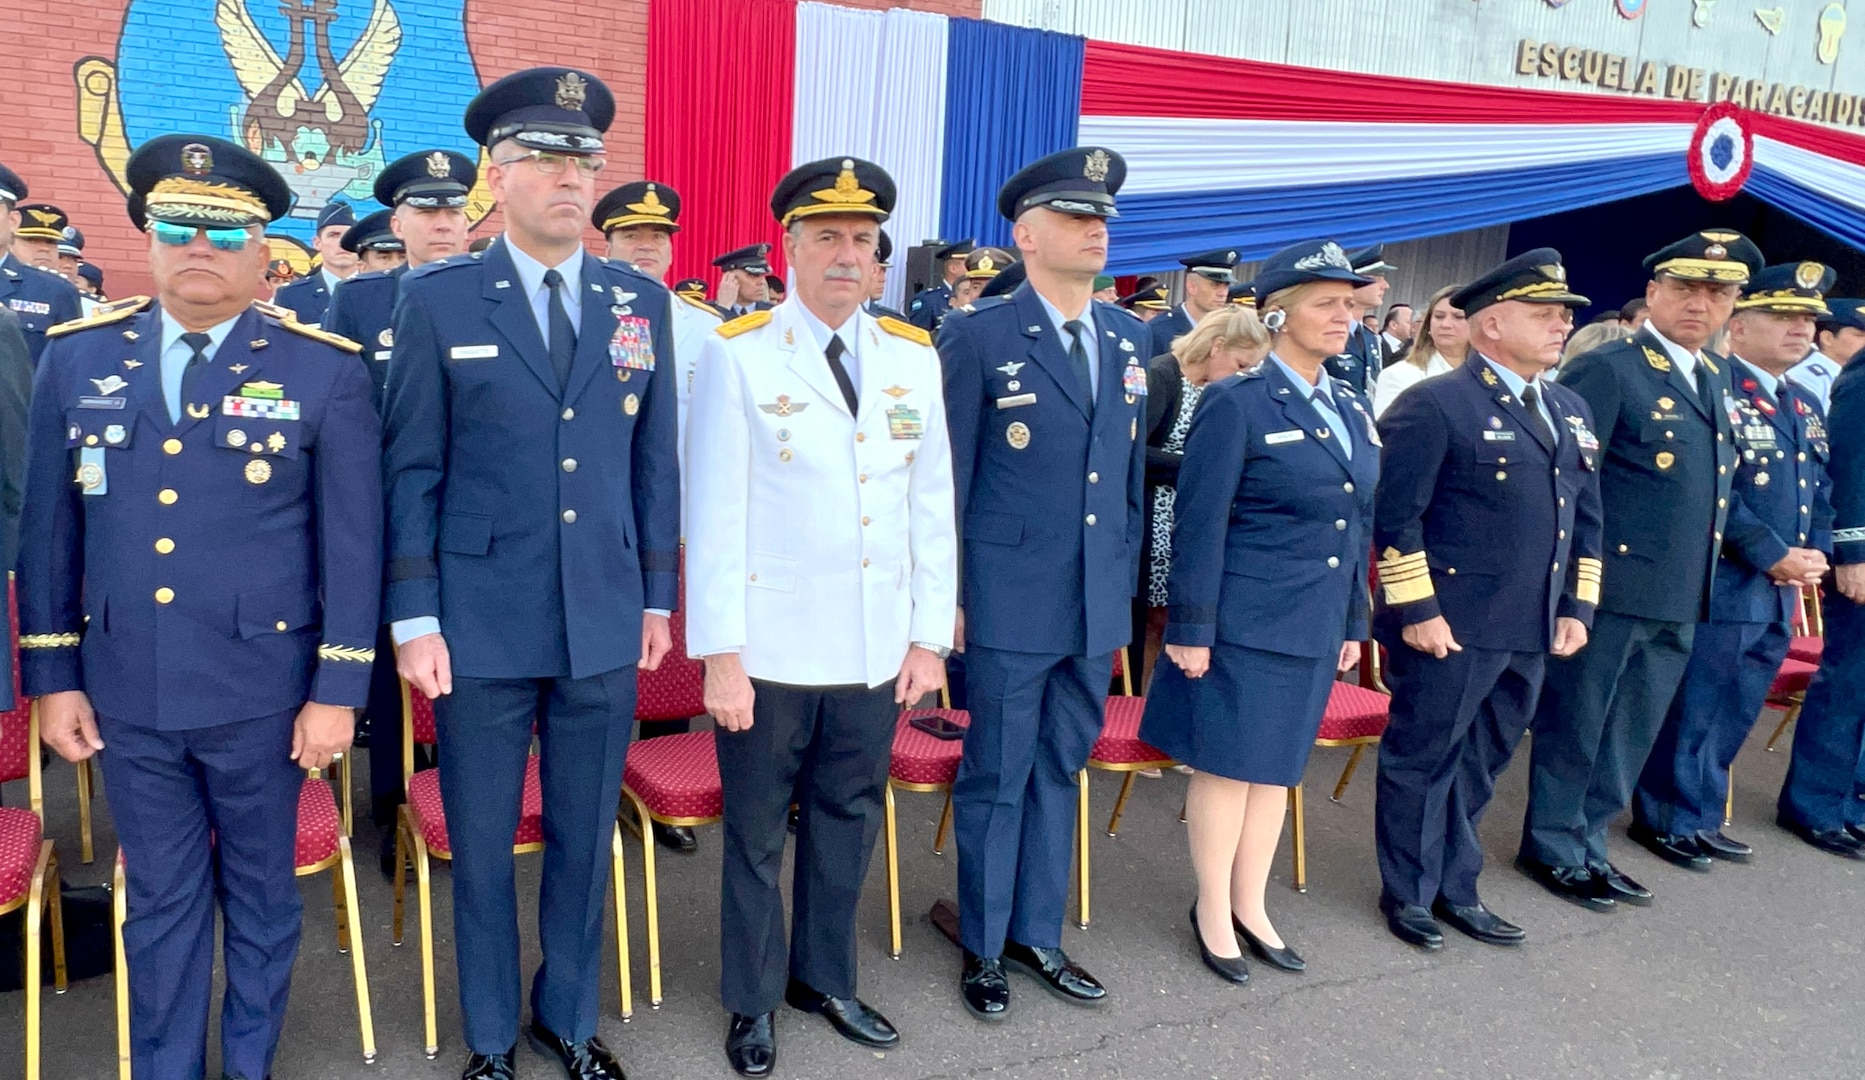 U.S. Air Force leaders Brig. Gen. Sean Choquette, 12th Air Force, Col. José Jiménez, Jr., Inter-American Air Forces Academy commandant, and Brig. Gen. Virginia Gaglio, Massachusetts Air National Guard, stand at attention beside other senior leaders at the Centennial Commemoration of the Paraguayan Air Force in Asunción, Paraguay, Feb. 22, 2023. Senior leaders from 10 countries attended the event to honor Paraguayan Air Force’s Centennial Anniversary. (Courtesy photo)